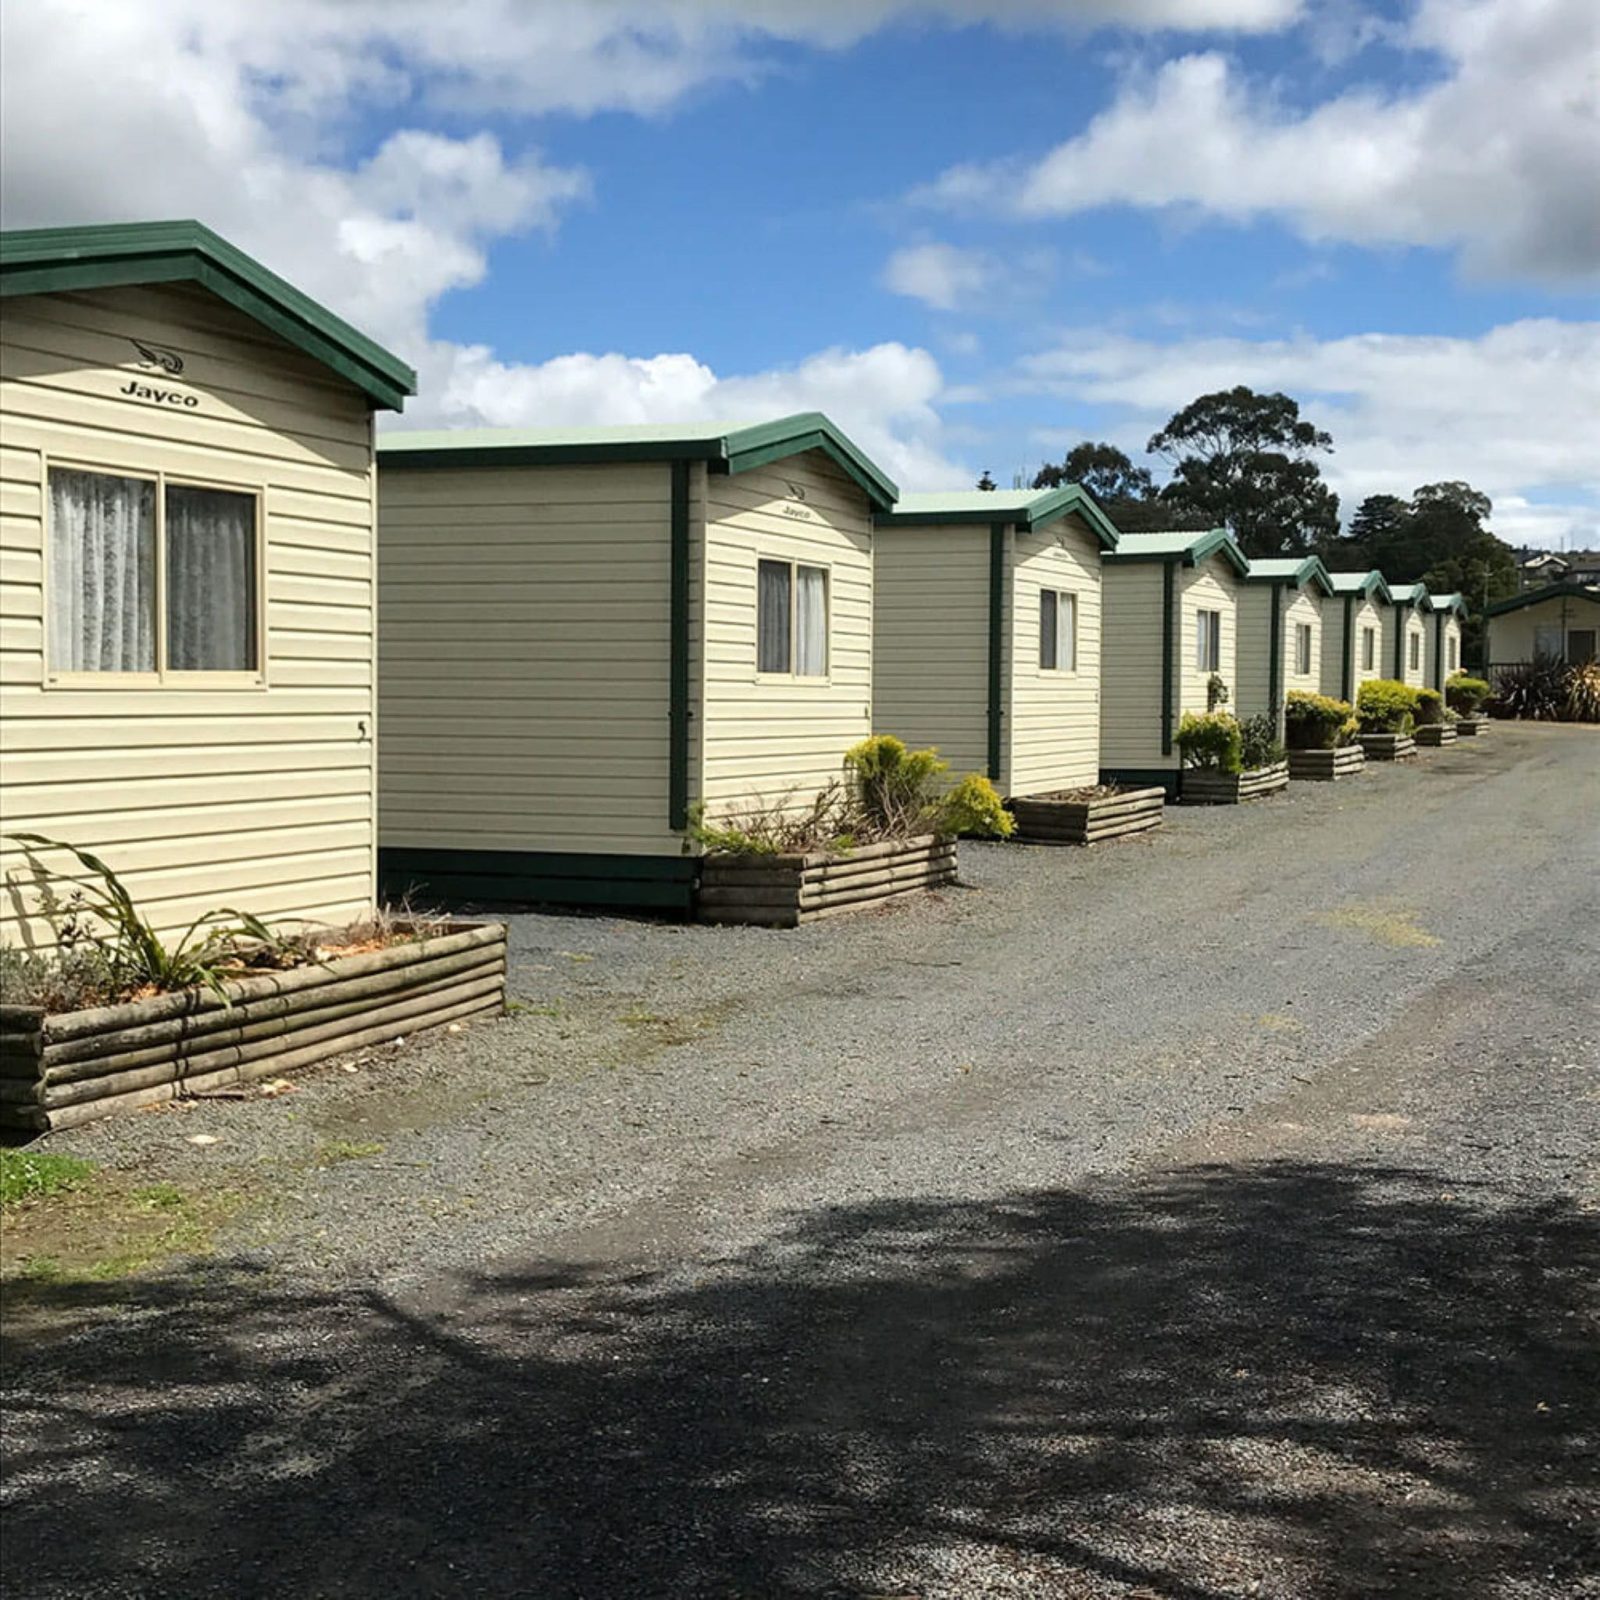 Prom Central Cabins